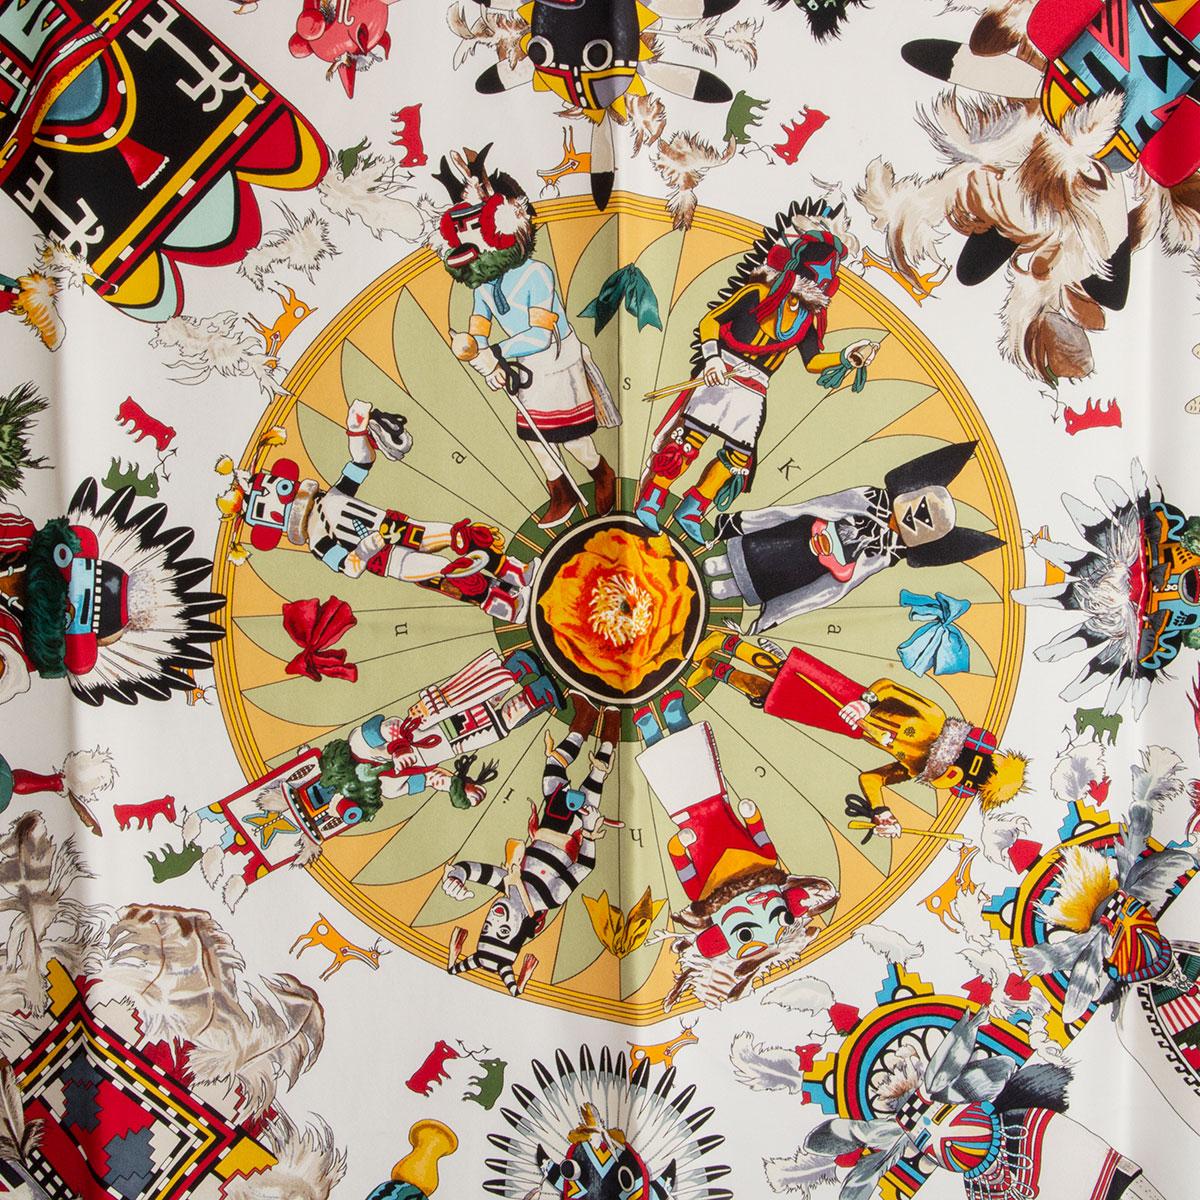 Hermes 'Kachinas 90' scarf by Kermit Oliver in yellow, sage green and white silk twill (100%) with kelly green border and multicolor details. Has been worn and is in excellent condition.

Kermit Oliver is the only American scarf designer for Hermes